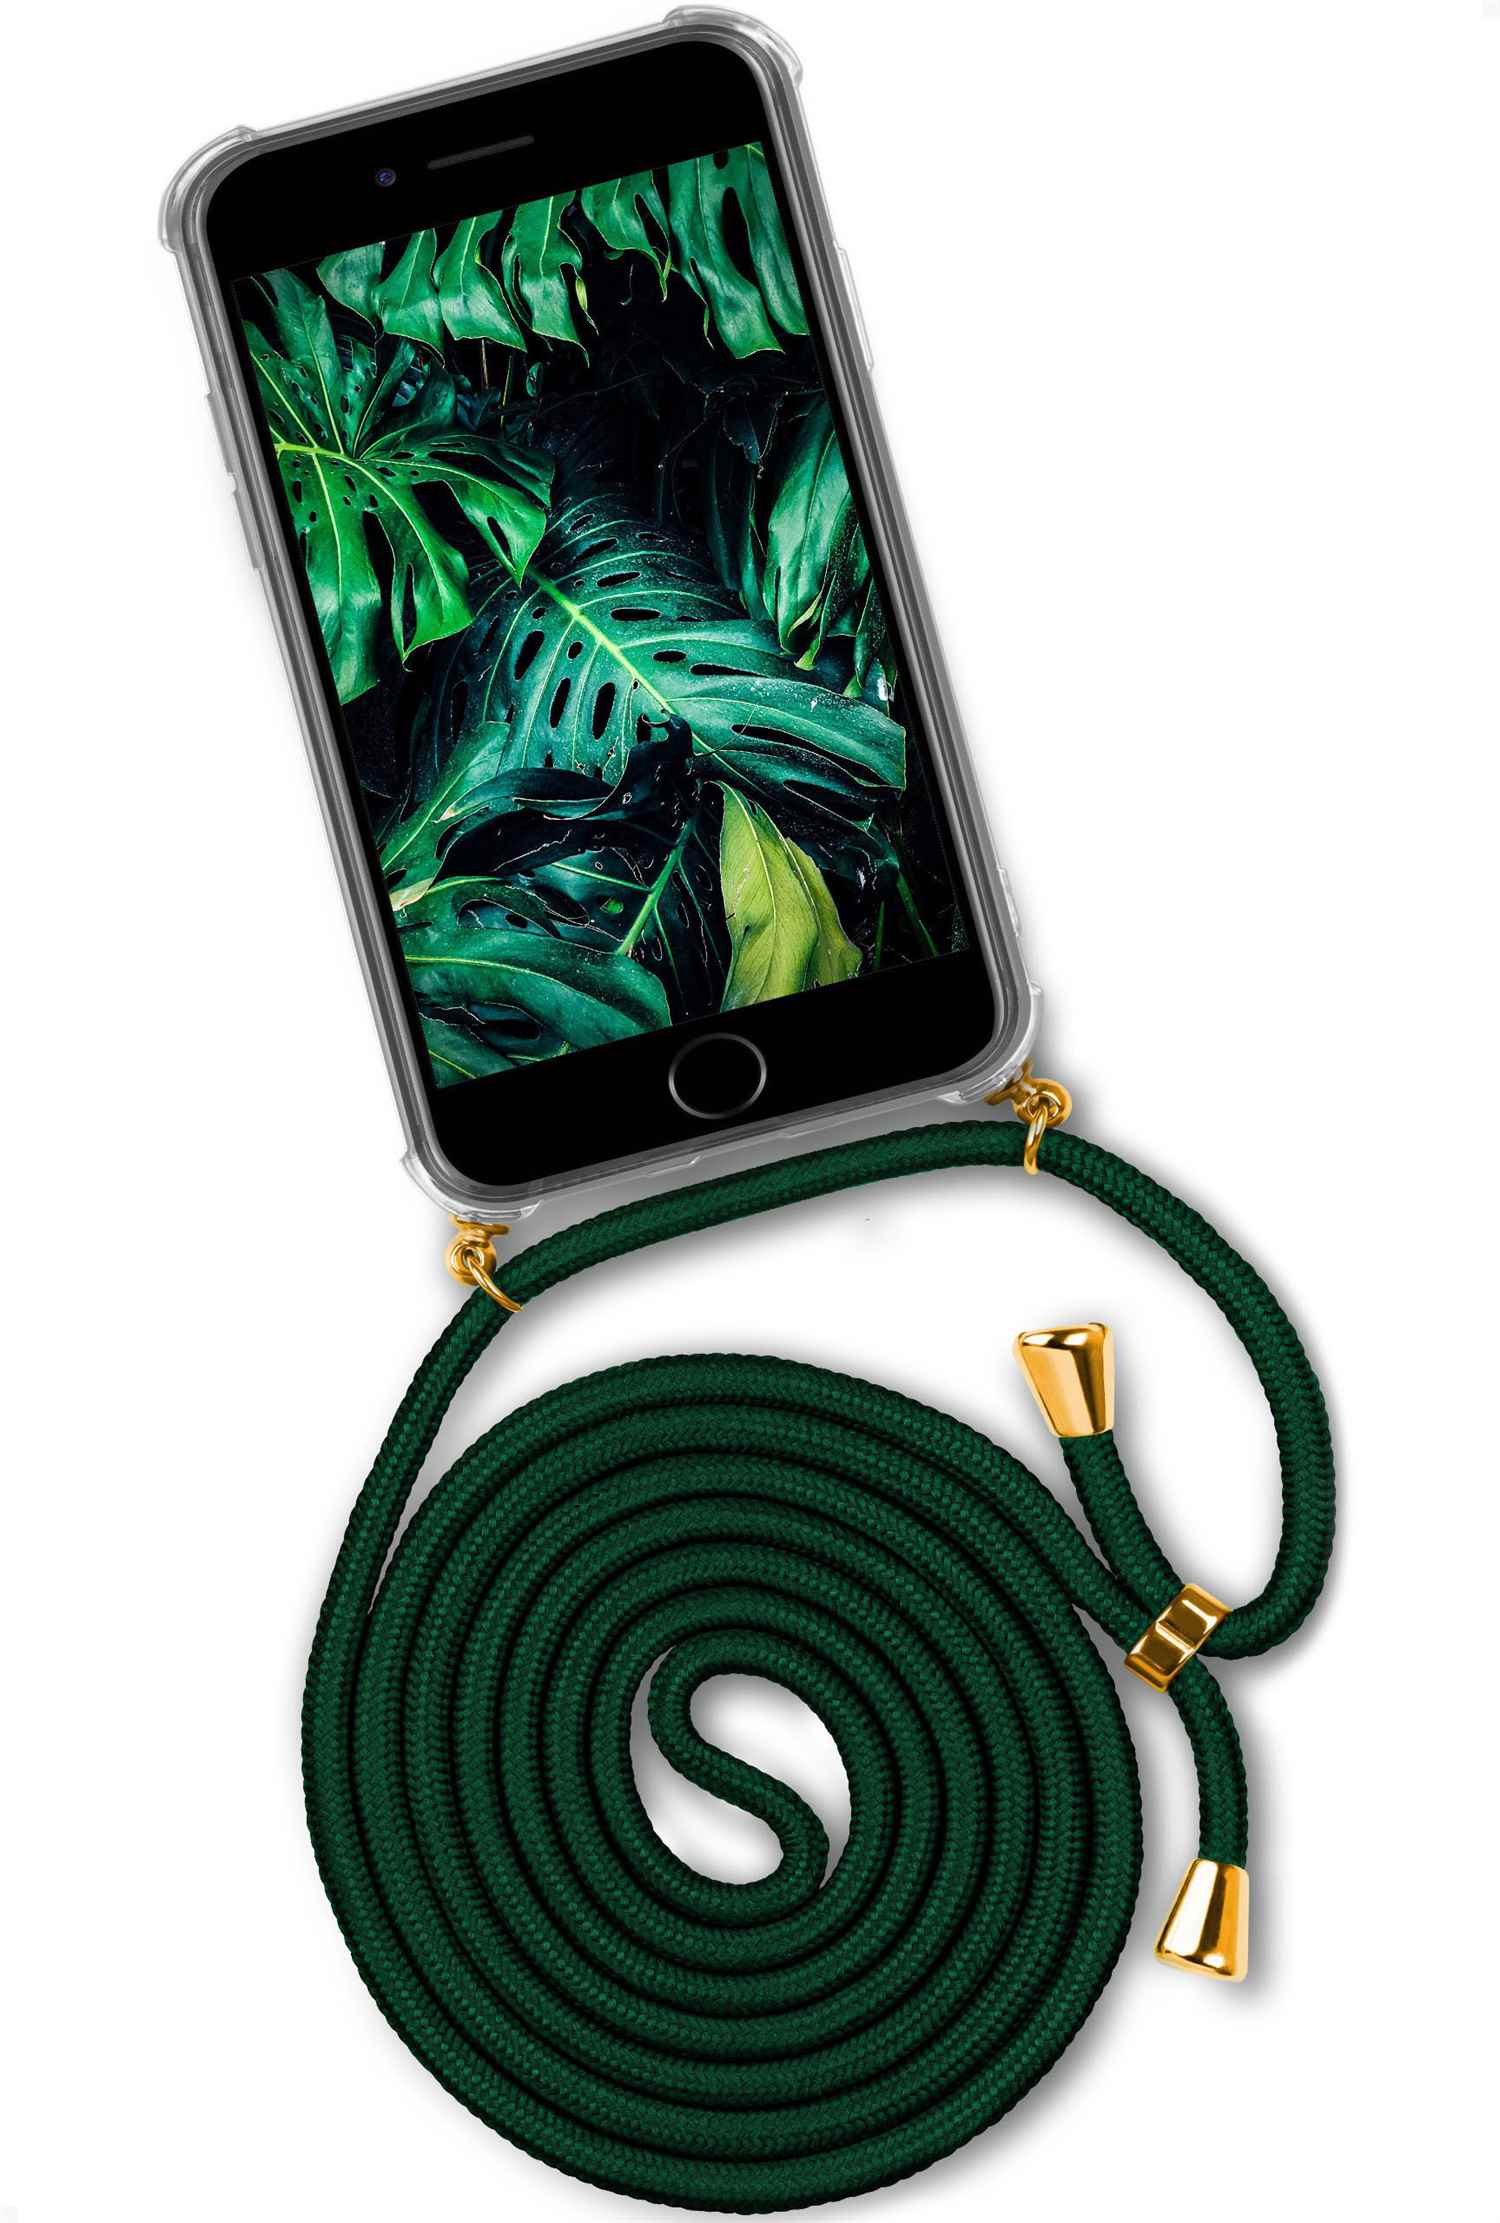 (Gold) ONEFLOW iPhone Case, Twist Apple, Deepest Jungle 6s, Backcover,